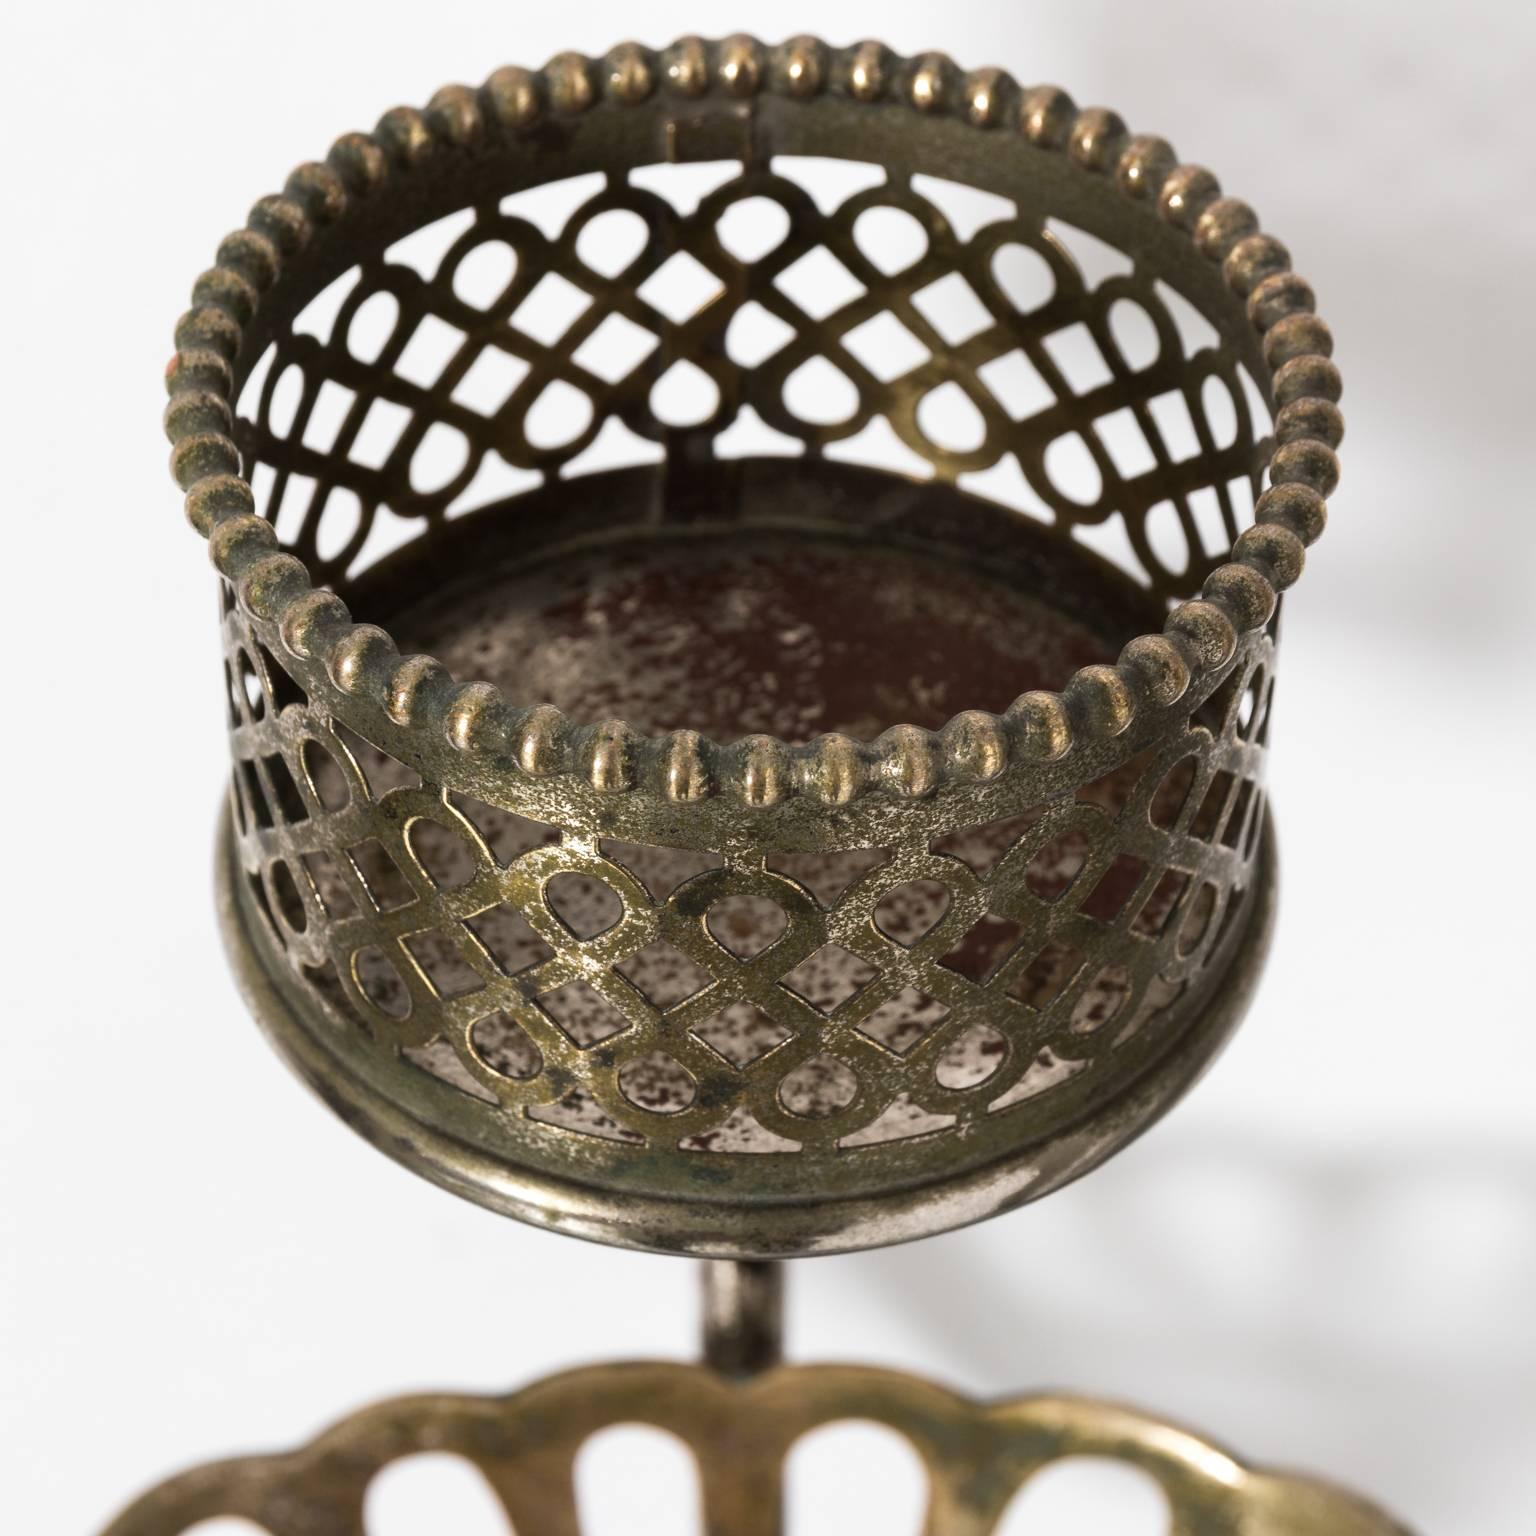 Beaded and reticulated cup and soap holder in original nickel-plated brass finish, circa 1900.
 